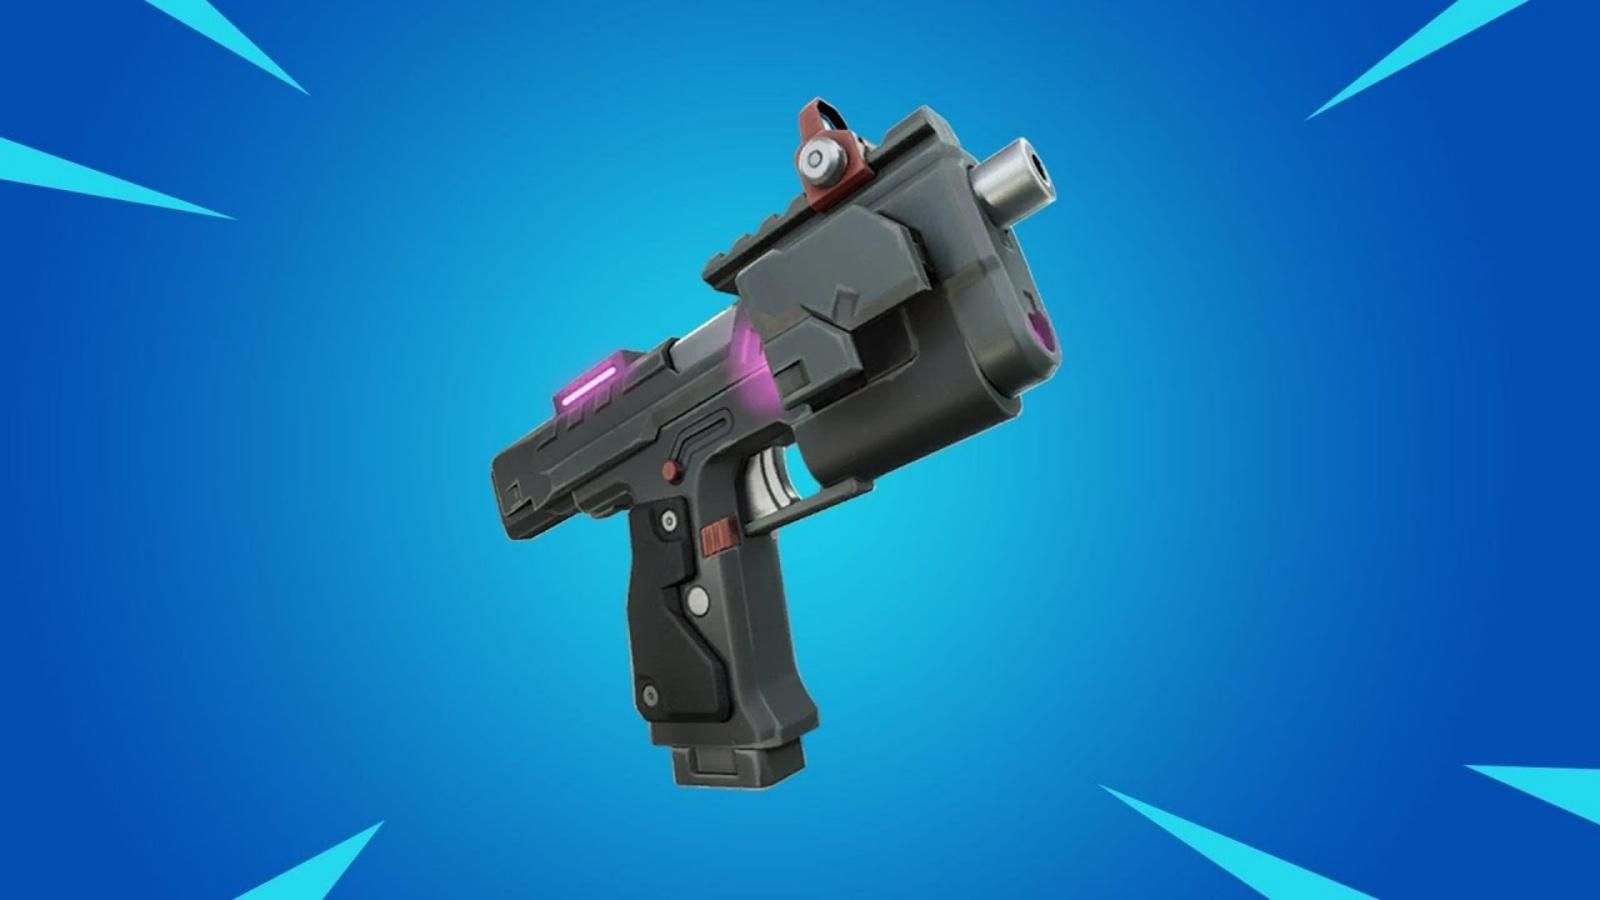 Fortnite players say new Lock-On Pistol is basically an aimbot gun